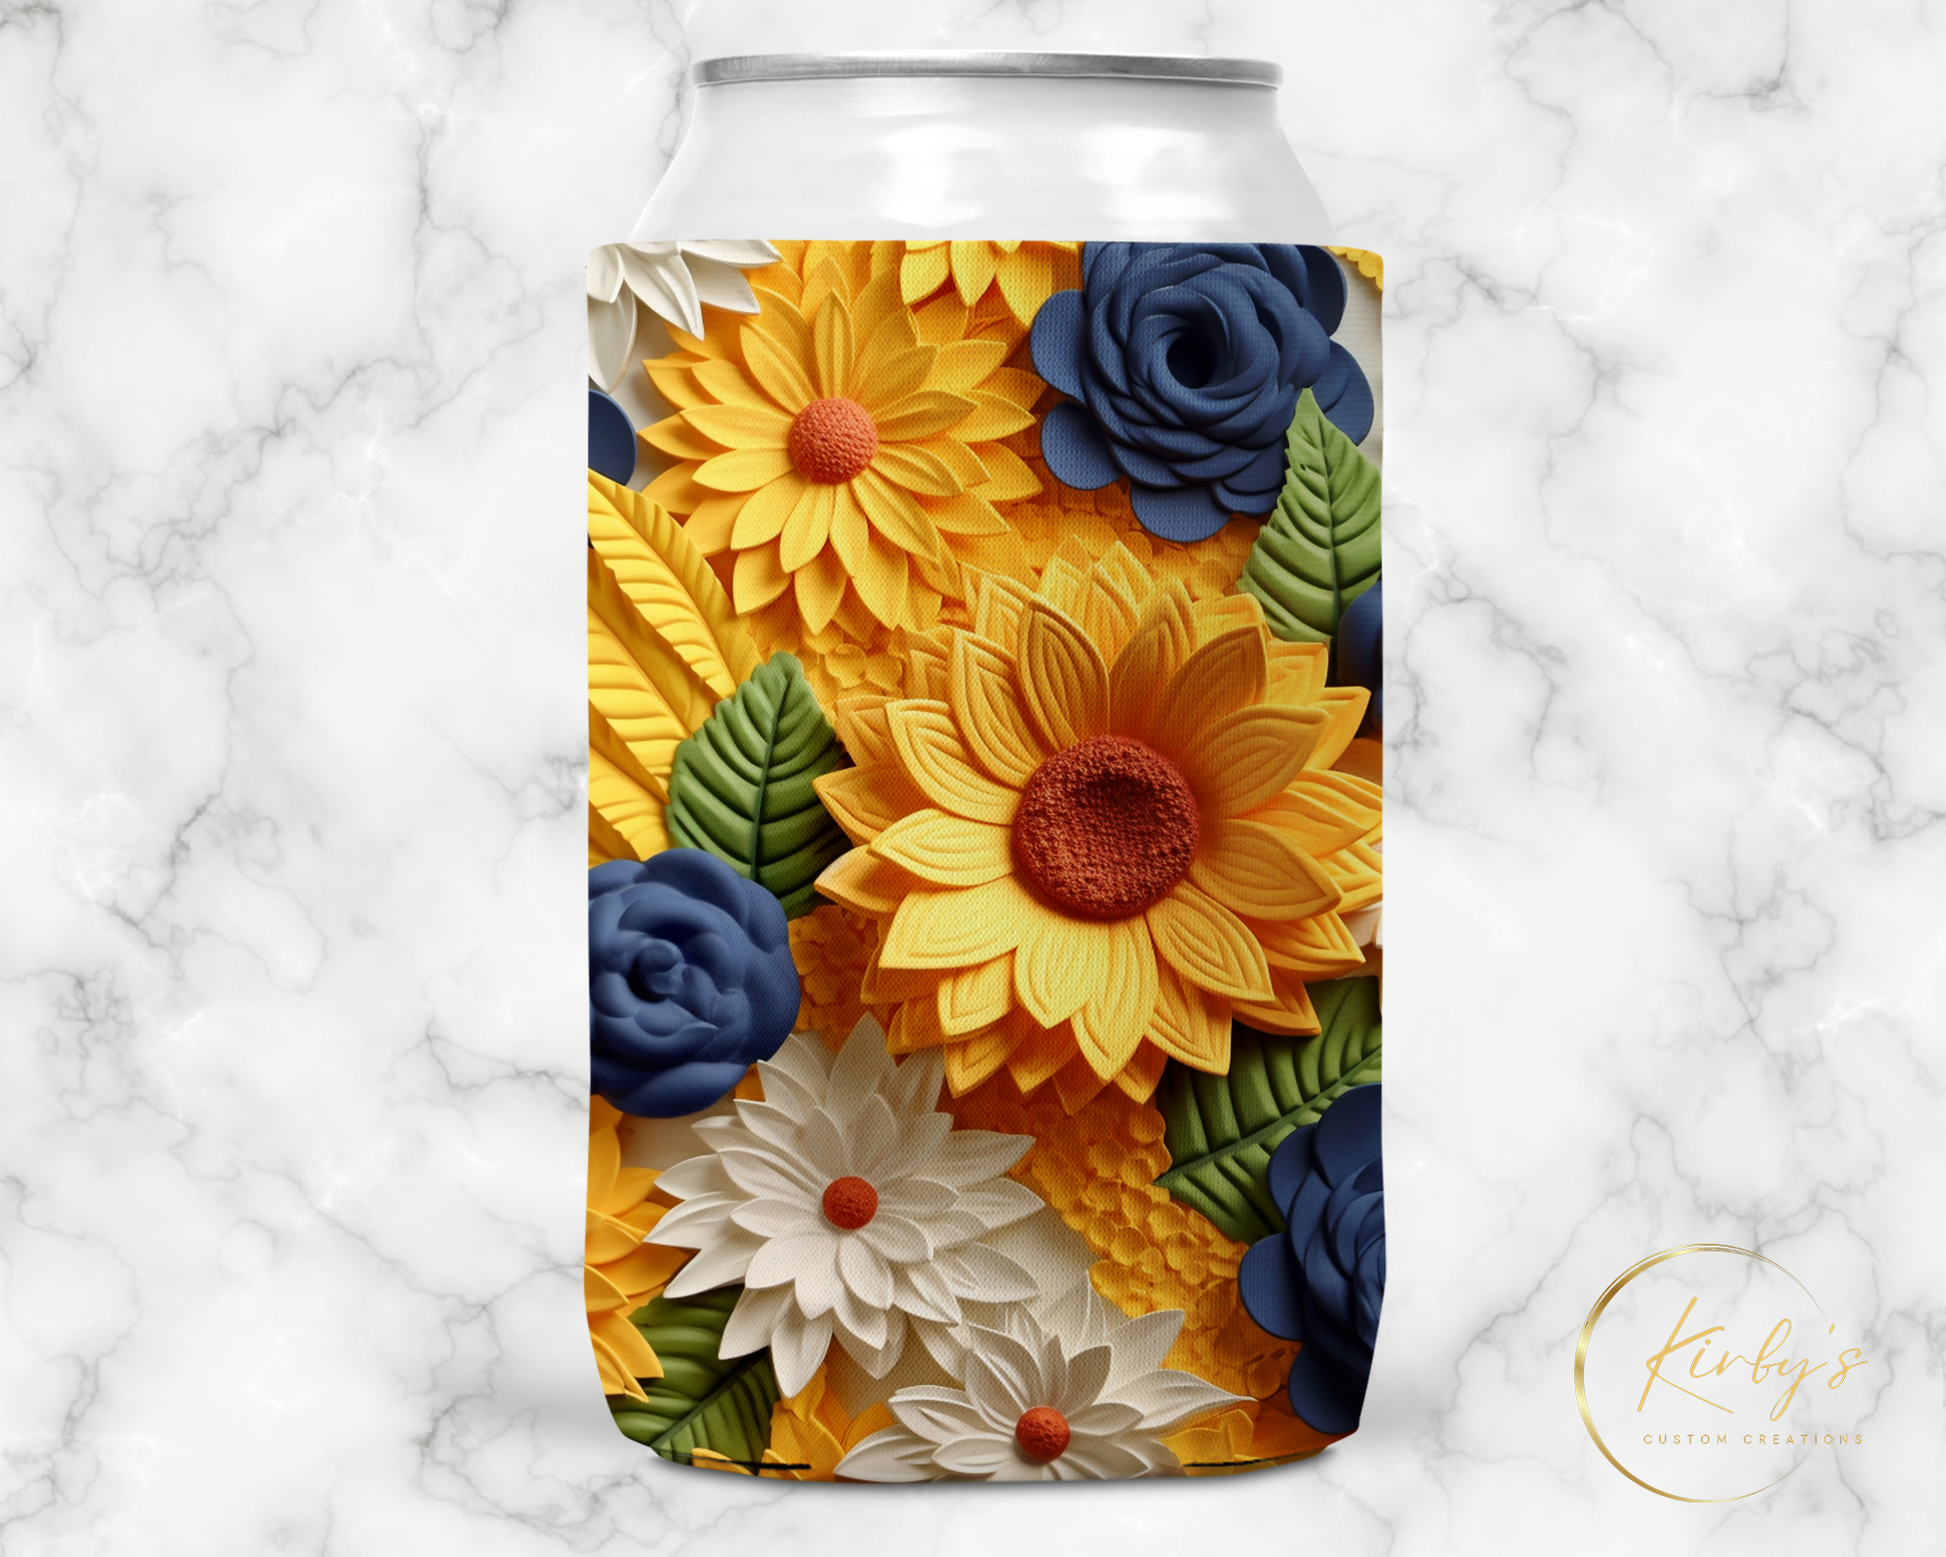 3D Floral Can Holder. Blue, White, and Yellow Flowers. Standard Soft Koozie